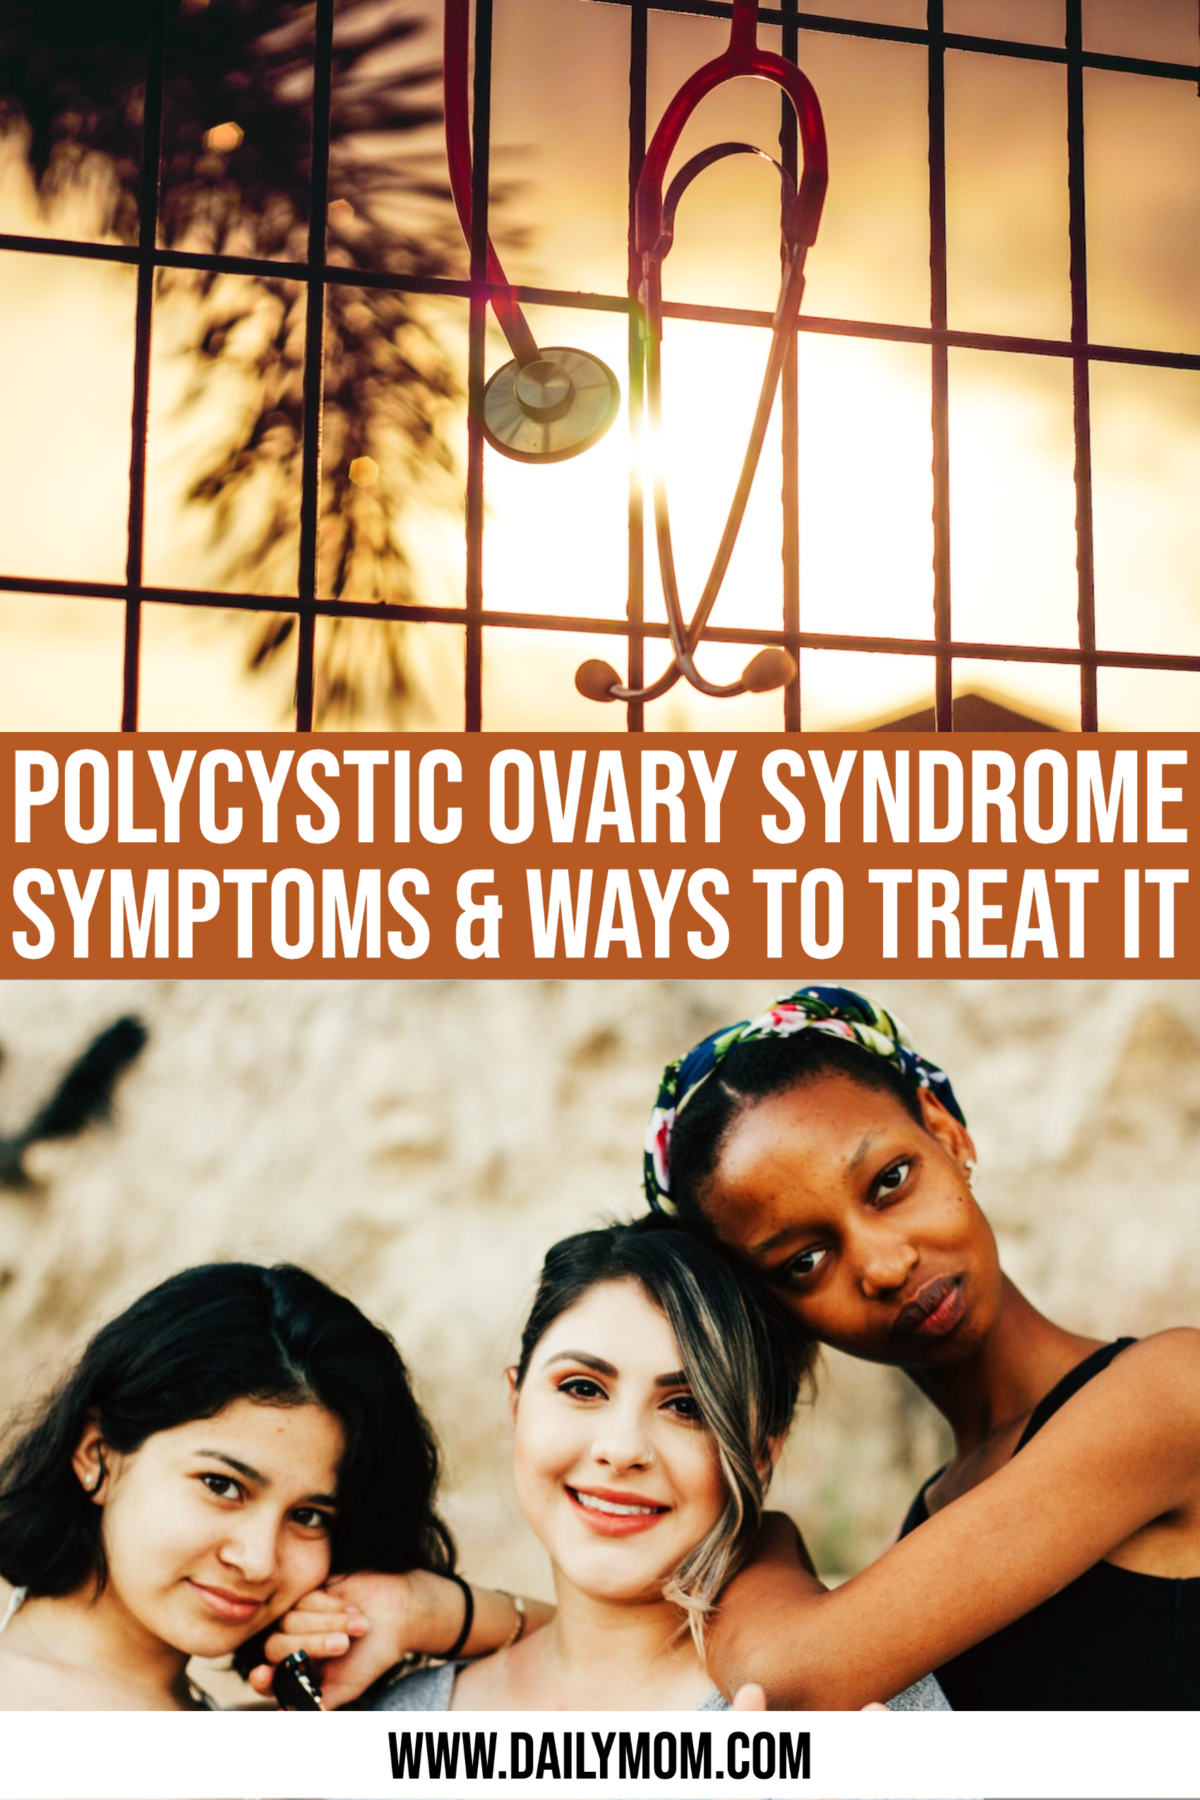 Symptoms Of Polycystic Ovary Syndrome And 3 Ways To Treat